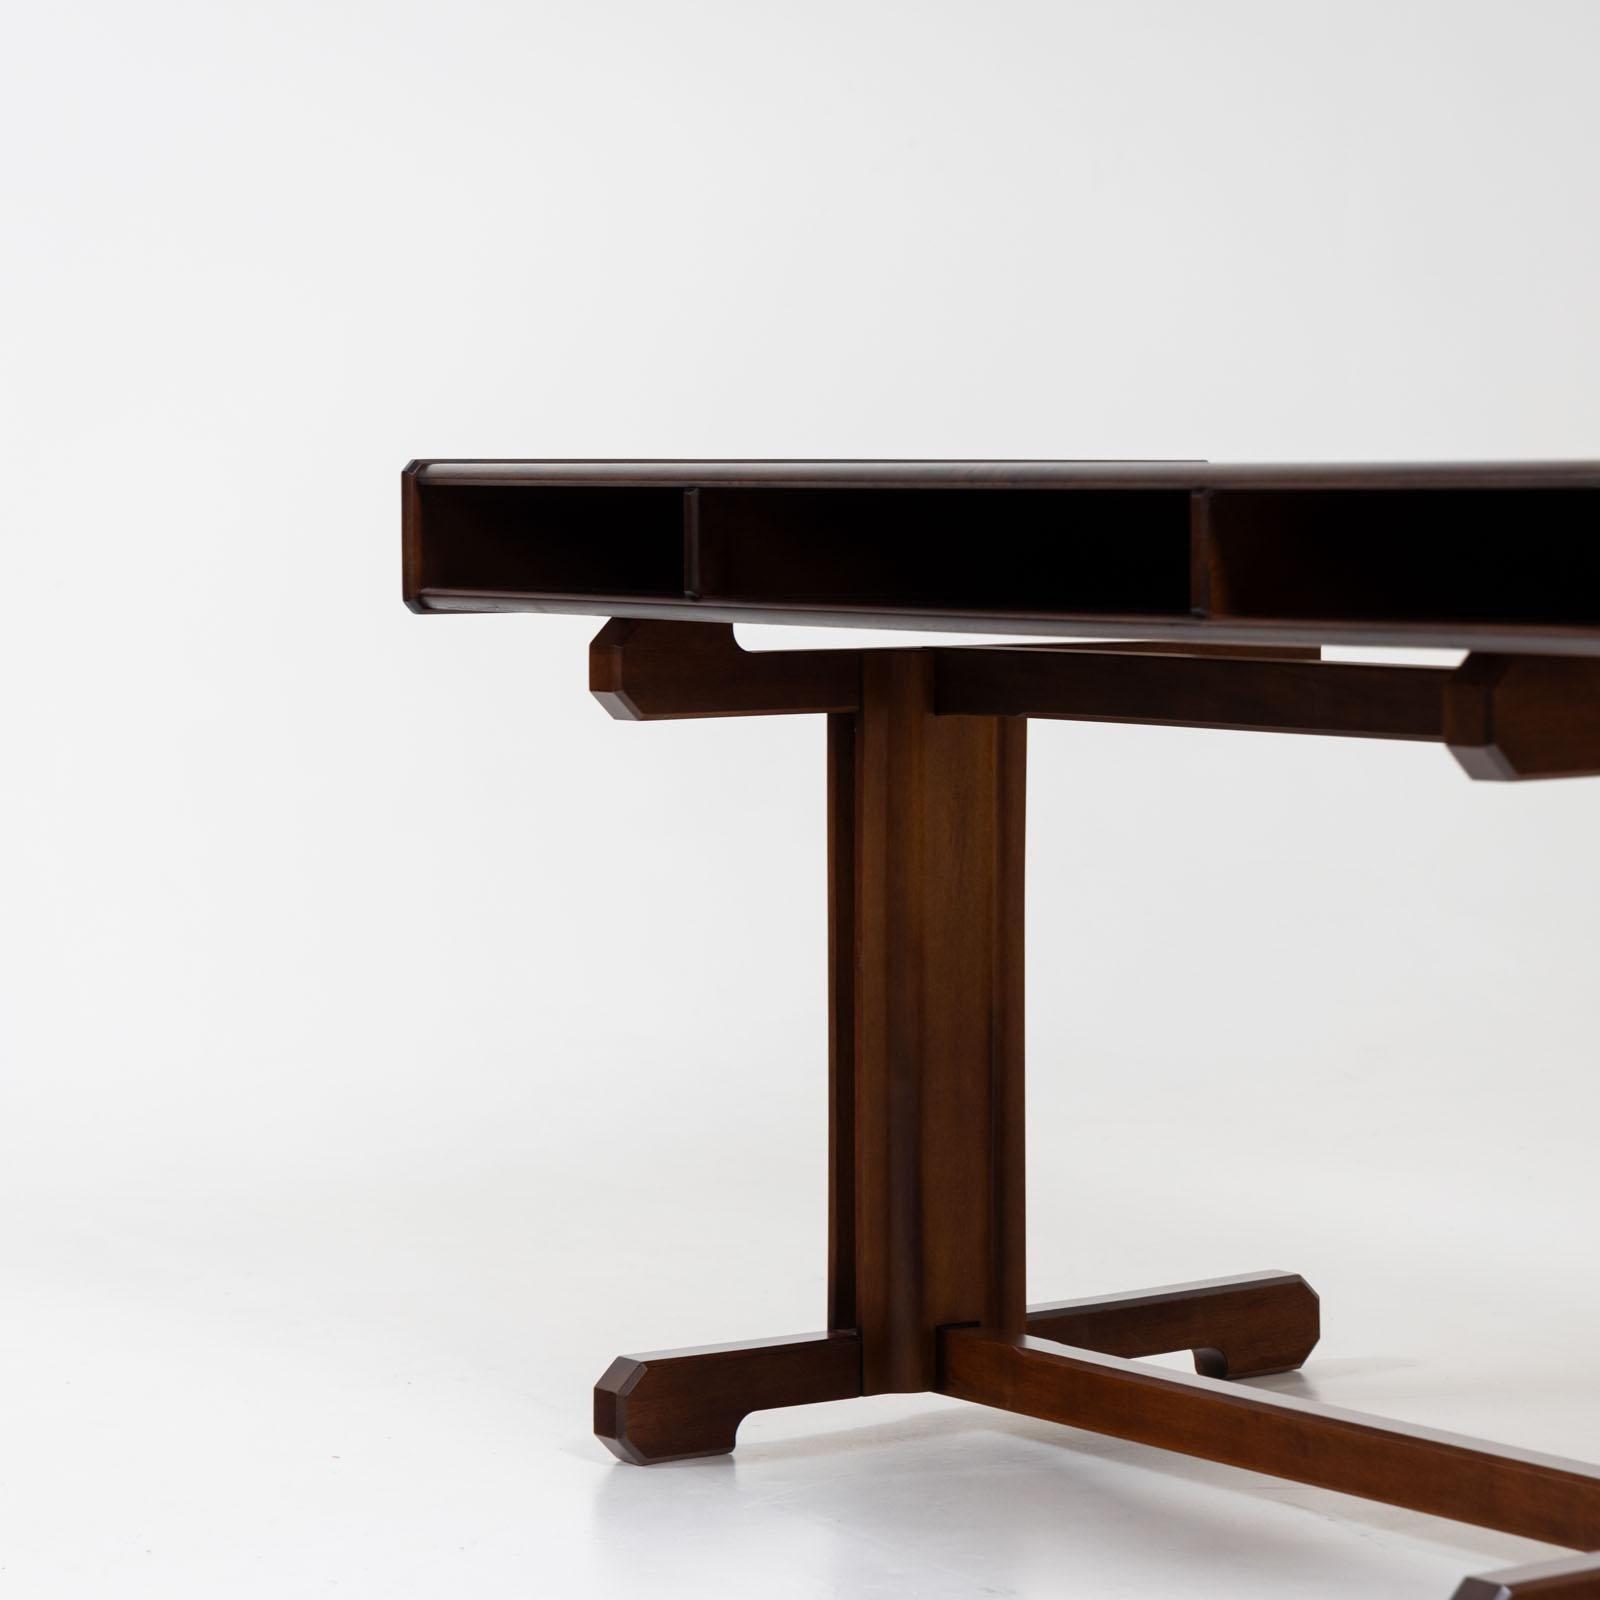 Dark brown desk with two drawers designed by Gianfranco Frattini in the 1950s. The desk stands on a solid base frame with H-shaped bracing. The rectangular table top has two drawers with round knobs on the front and a central storage compartment.